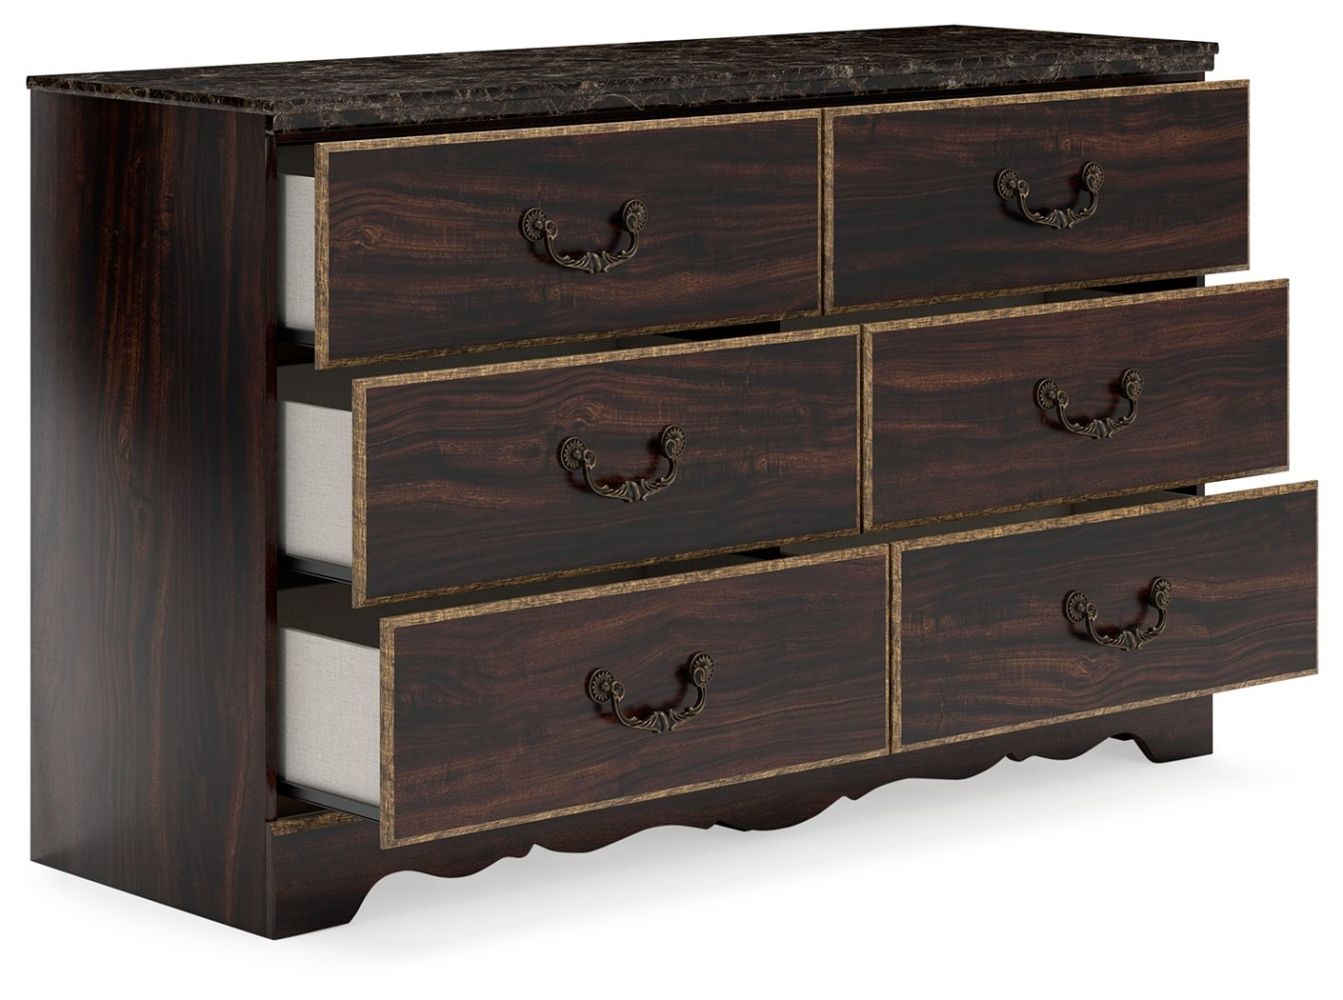 Glosmount – Two-tone- 7 Pc. – Dresser, Mirror, King Poster Bed, 2 Nightstands B1055/231/36/68/66/97/92(2)